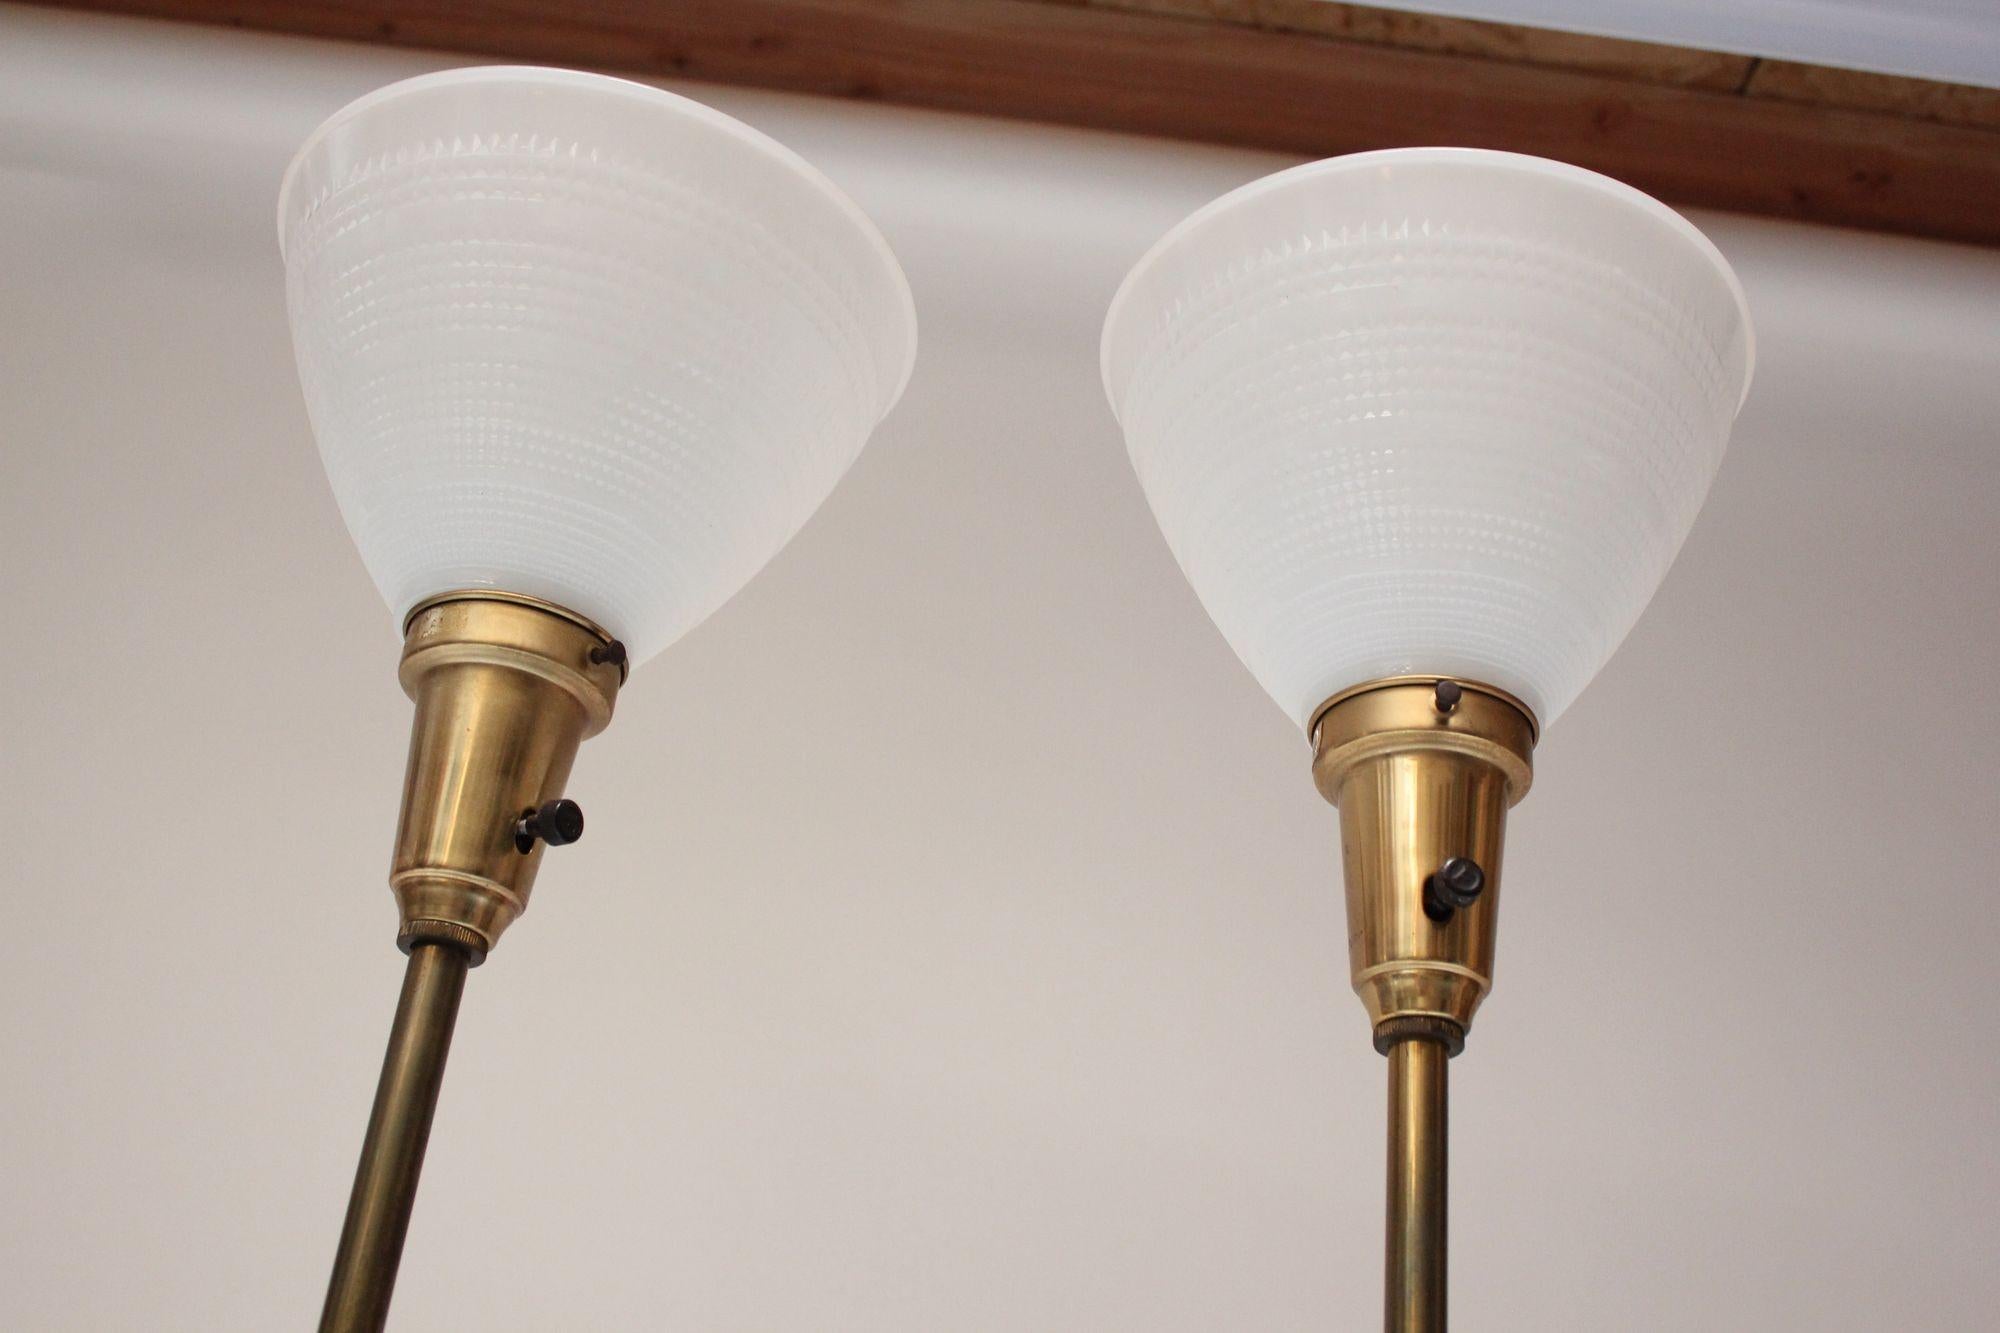 Mid-20th Century Pair of Hollywood Regency-Style Brass and Glass Stiffel Table Lamps For Sale